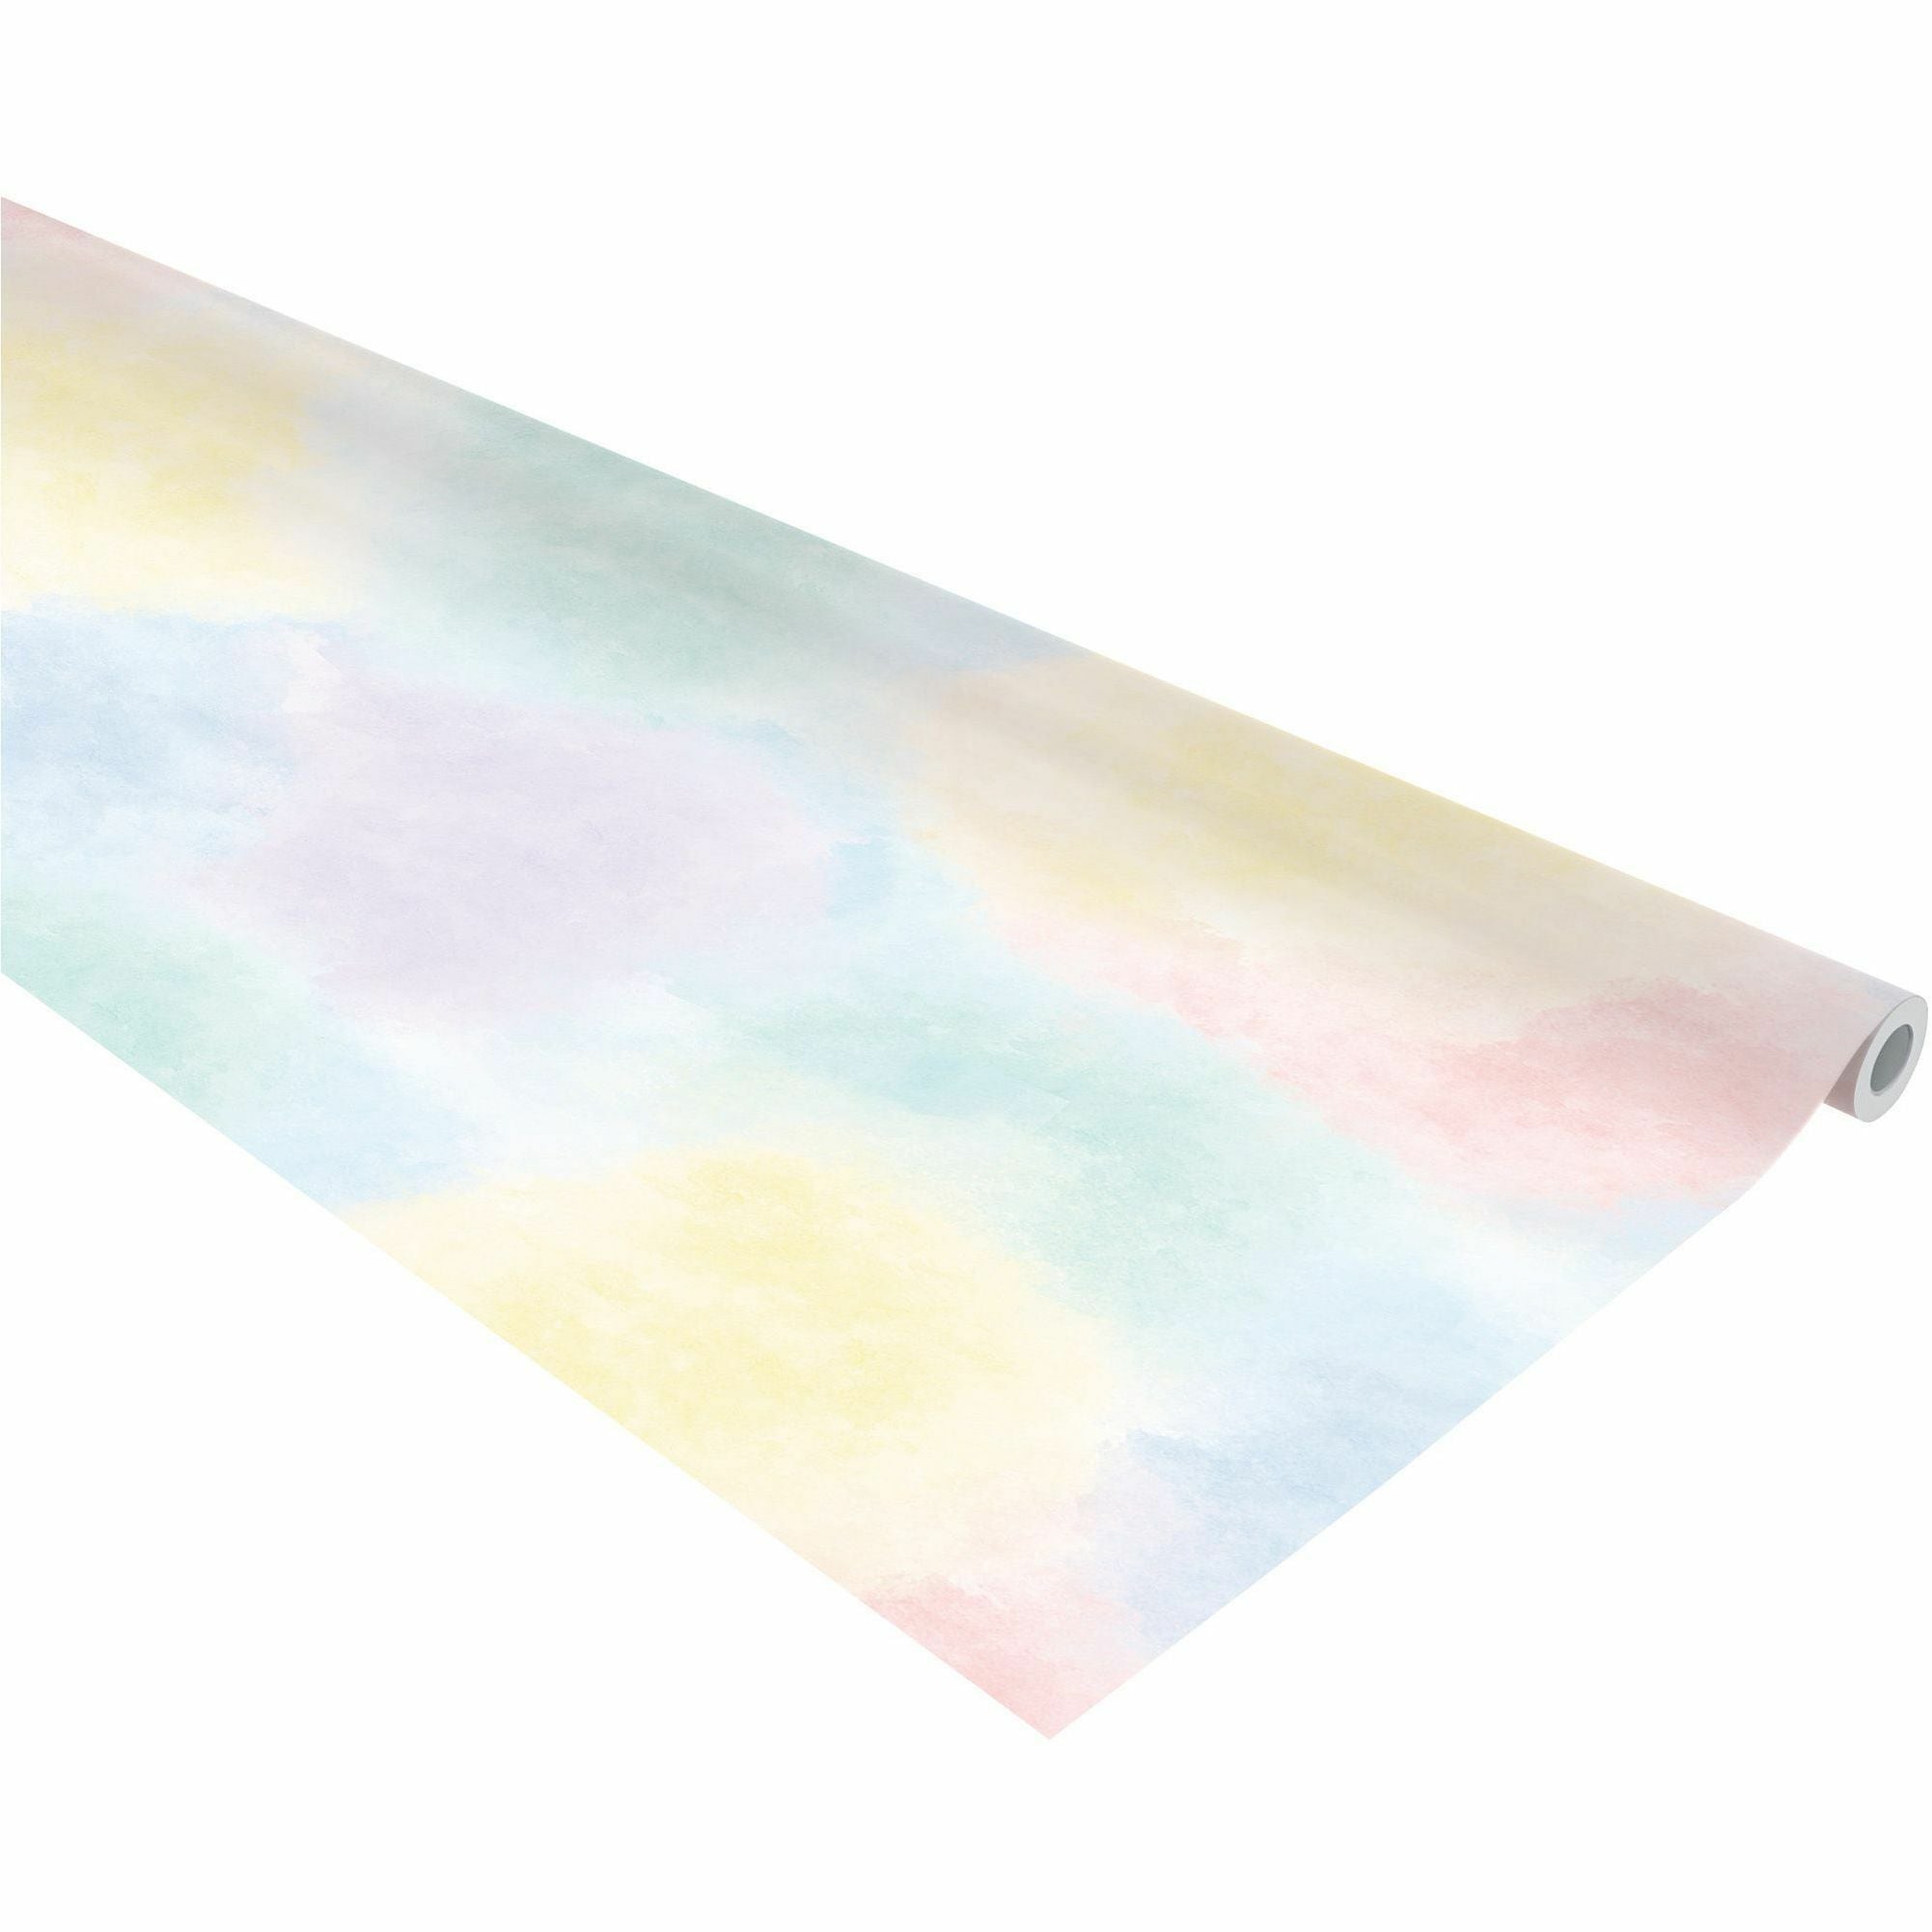 fadeless-bulletin-board-paper-rolls-art-classroom-school-home-office-decoration-door-file-cabinet-display-table-skirting-party-48width-x-50-ftlength-1-roll-watercolor-paper_pacp0057515 - 2